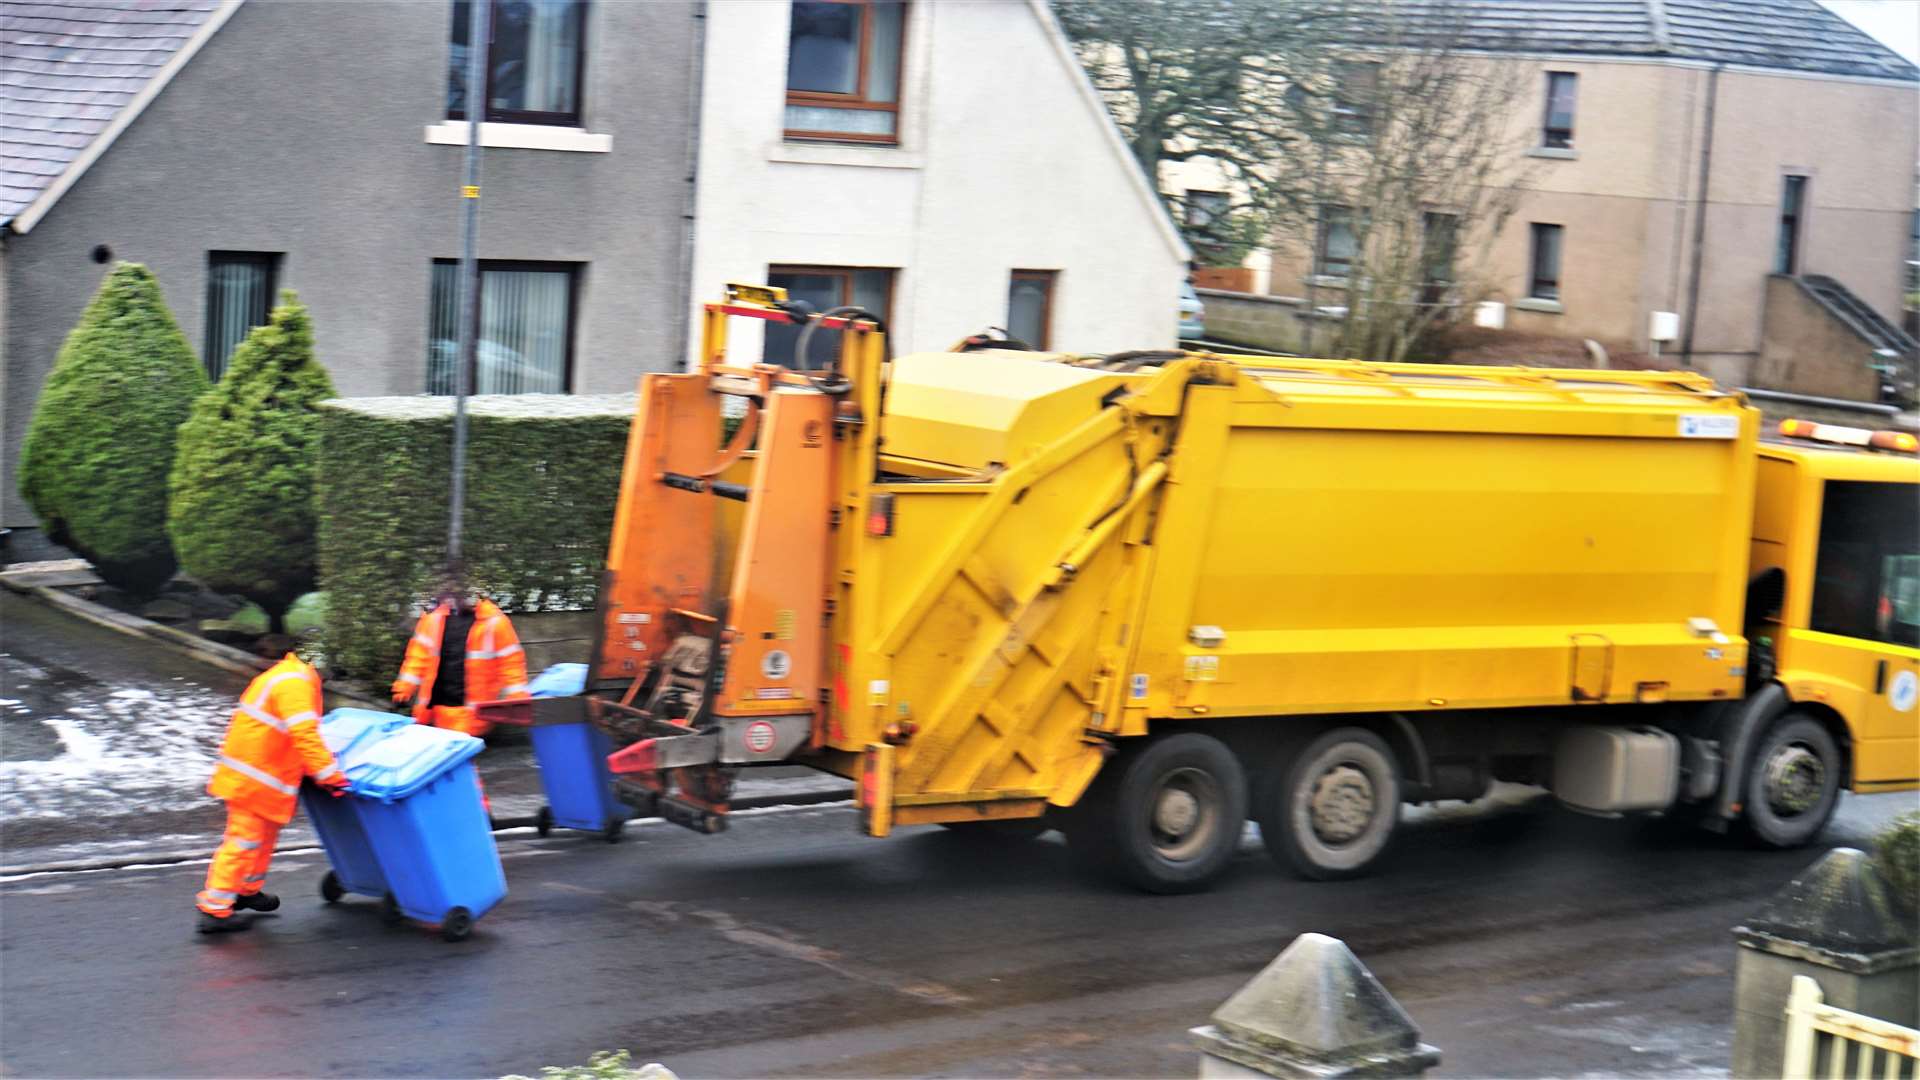 Check the council's information on bin collection. Picture: DGS